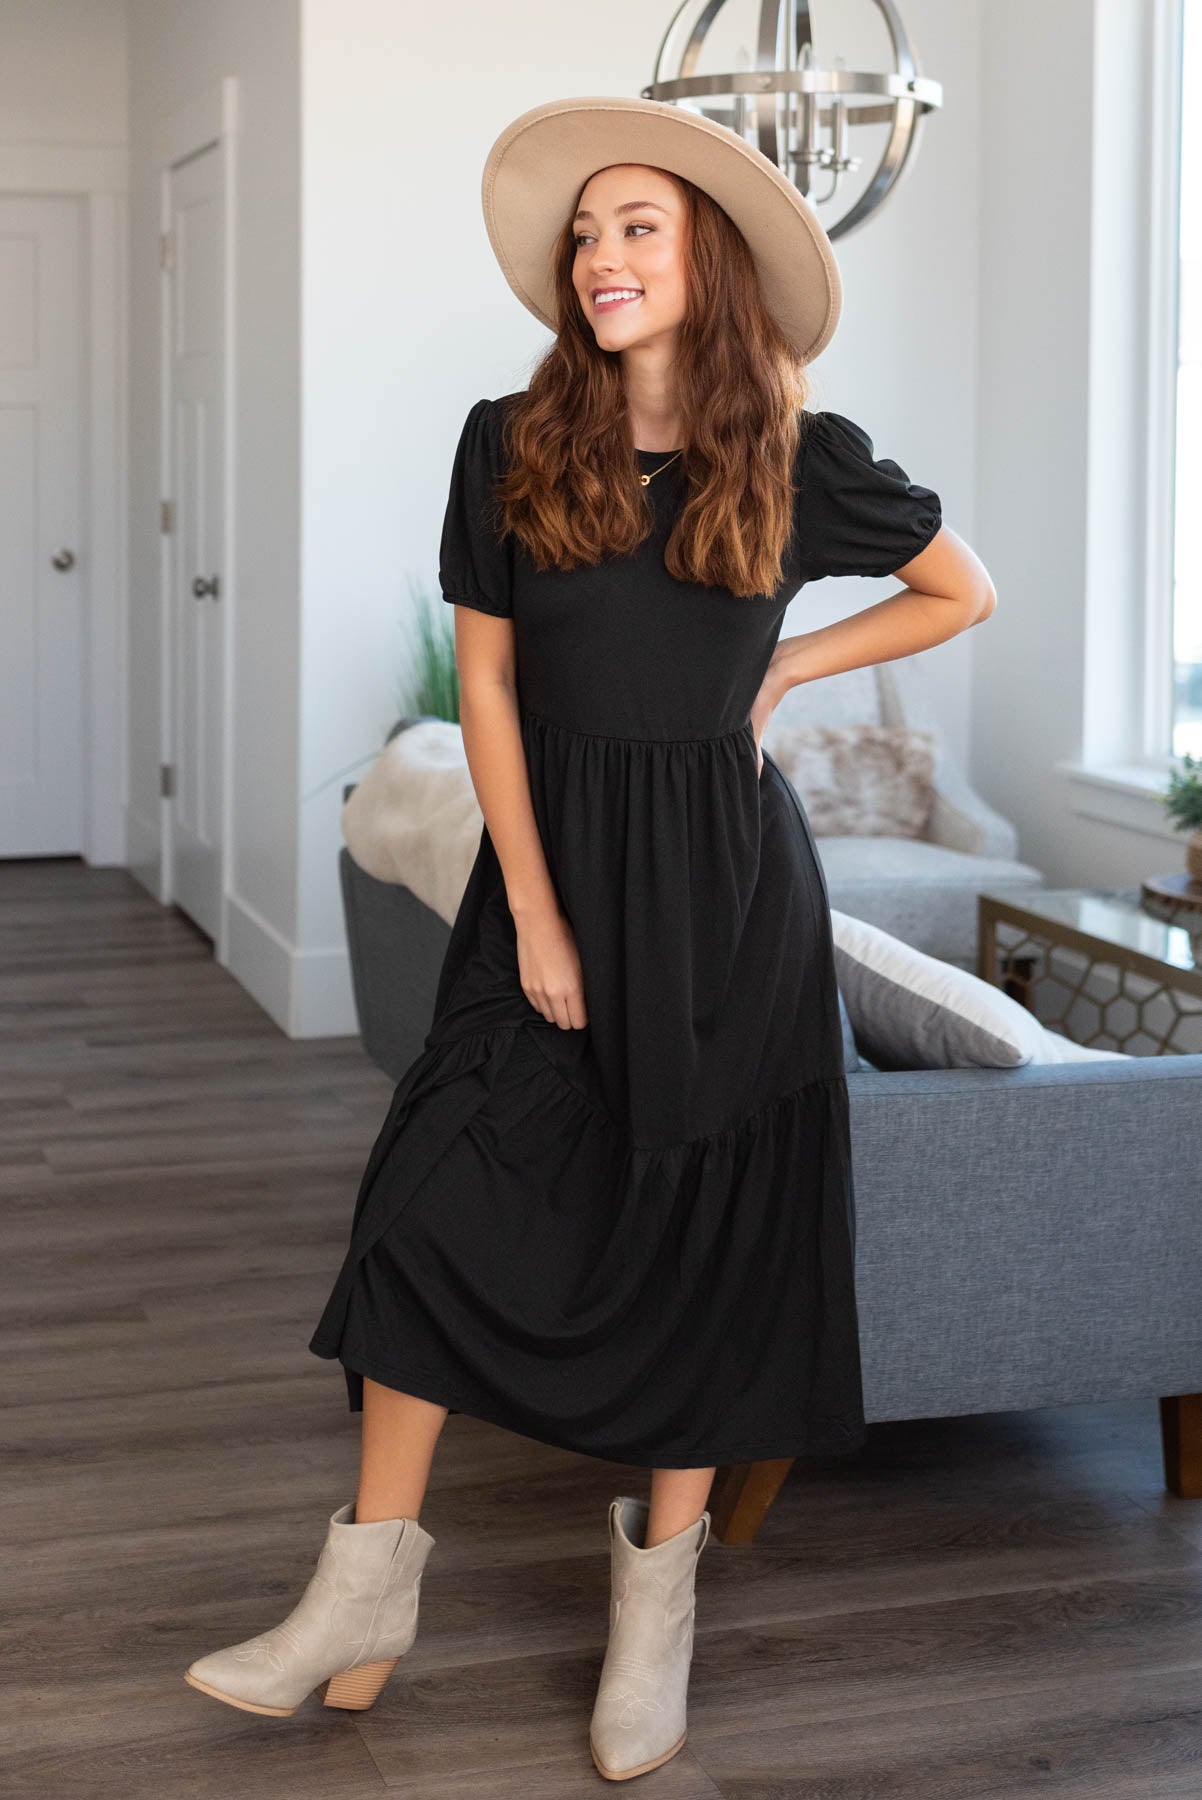 Black dress with short puff sleeves